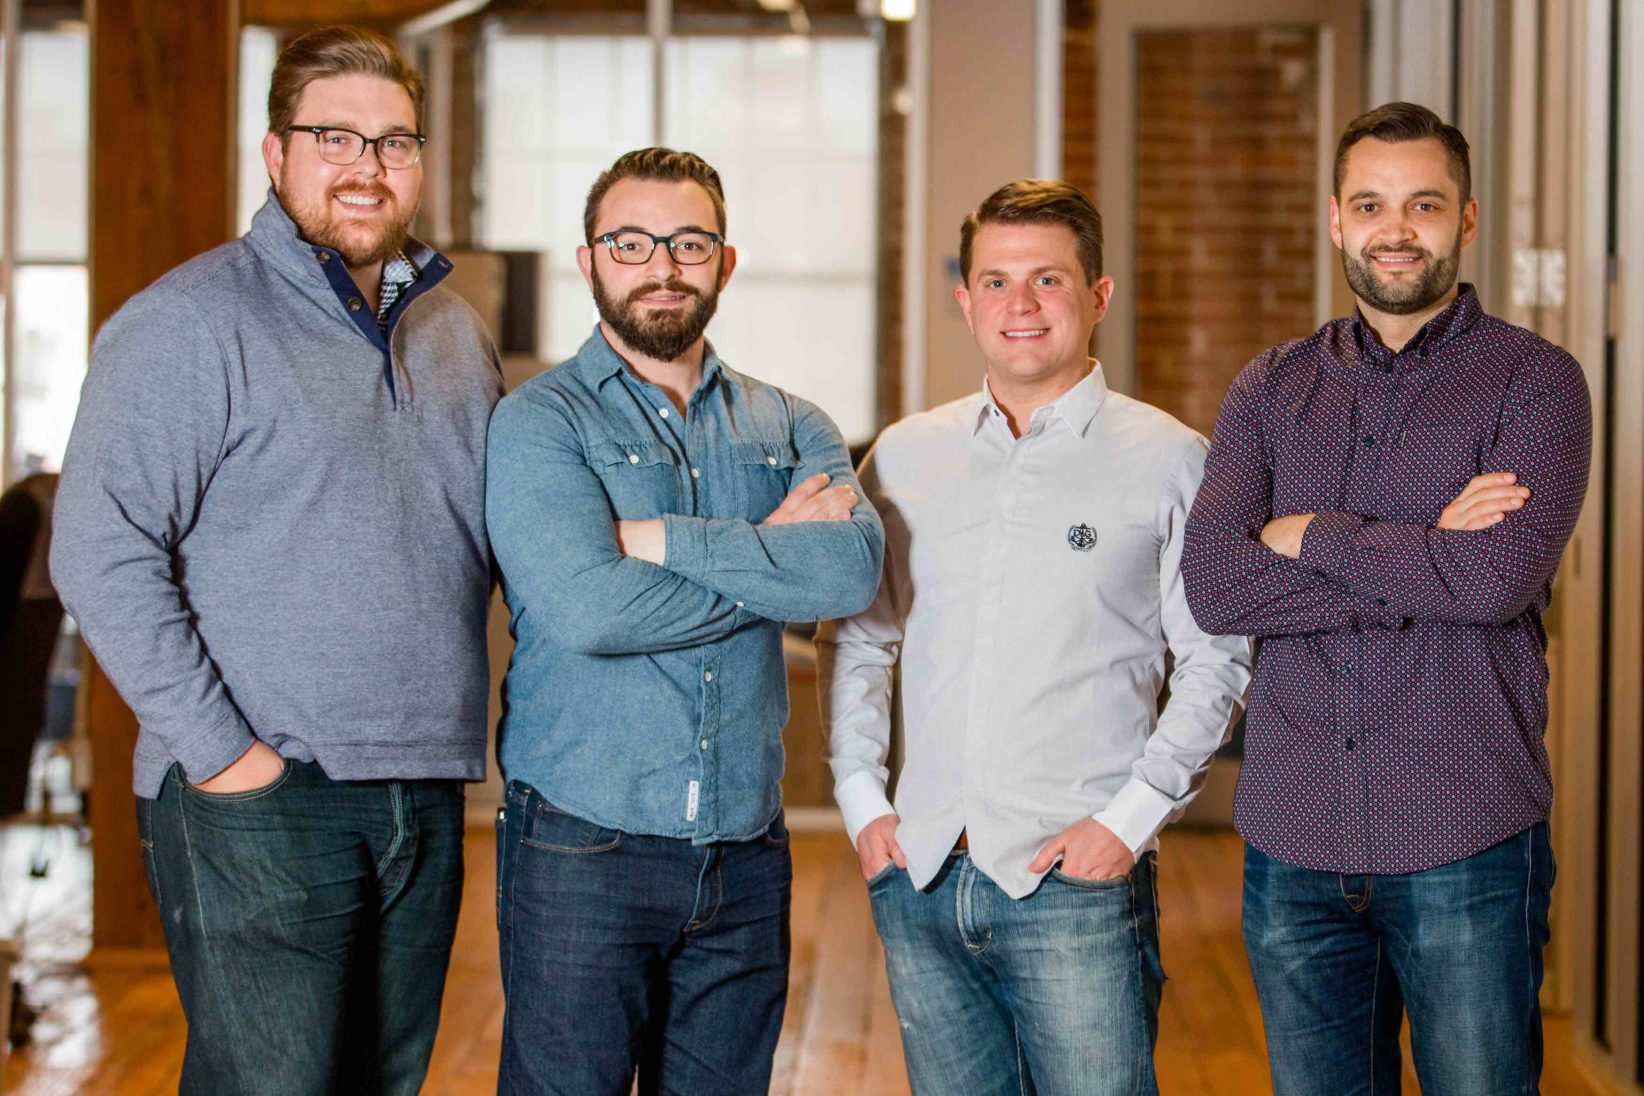 The Collective Funds targets Kansas City startups with $10M